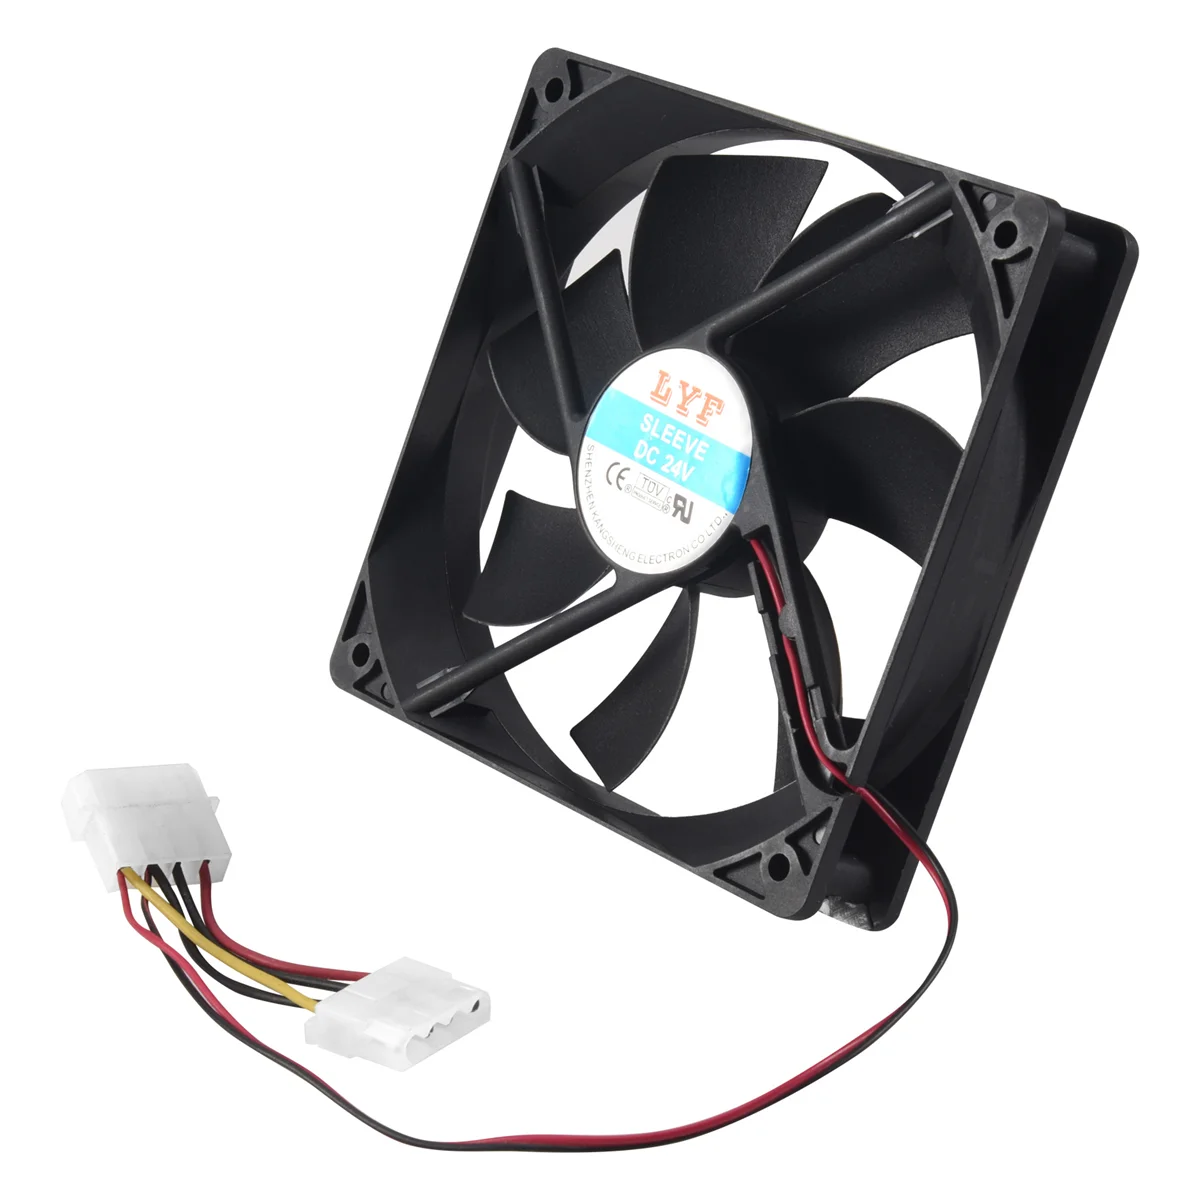 

120mm x 25mm DC 24V 4Pin Sleeve Bearing Computer Case Cooling Fan